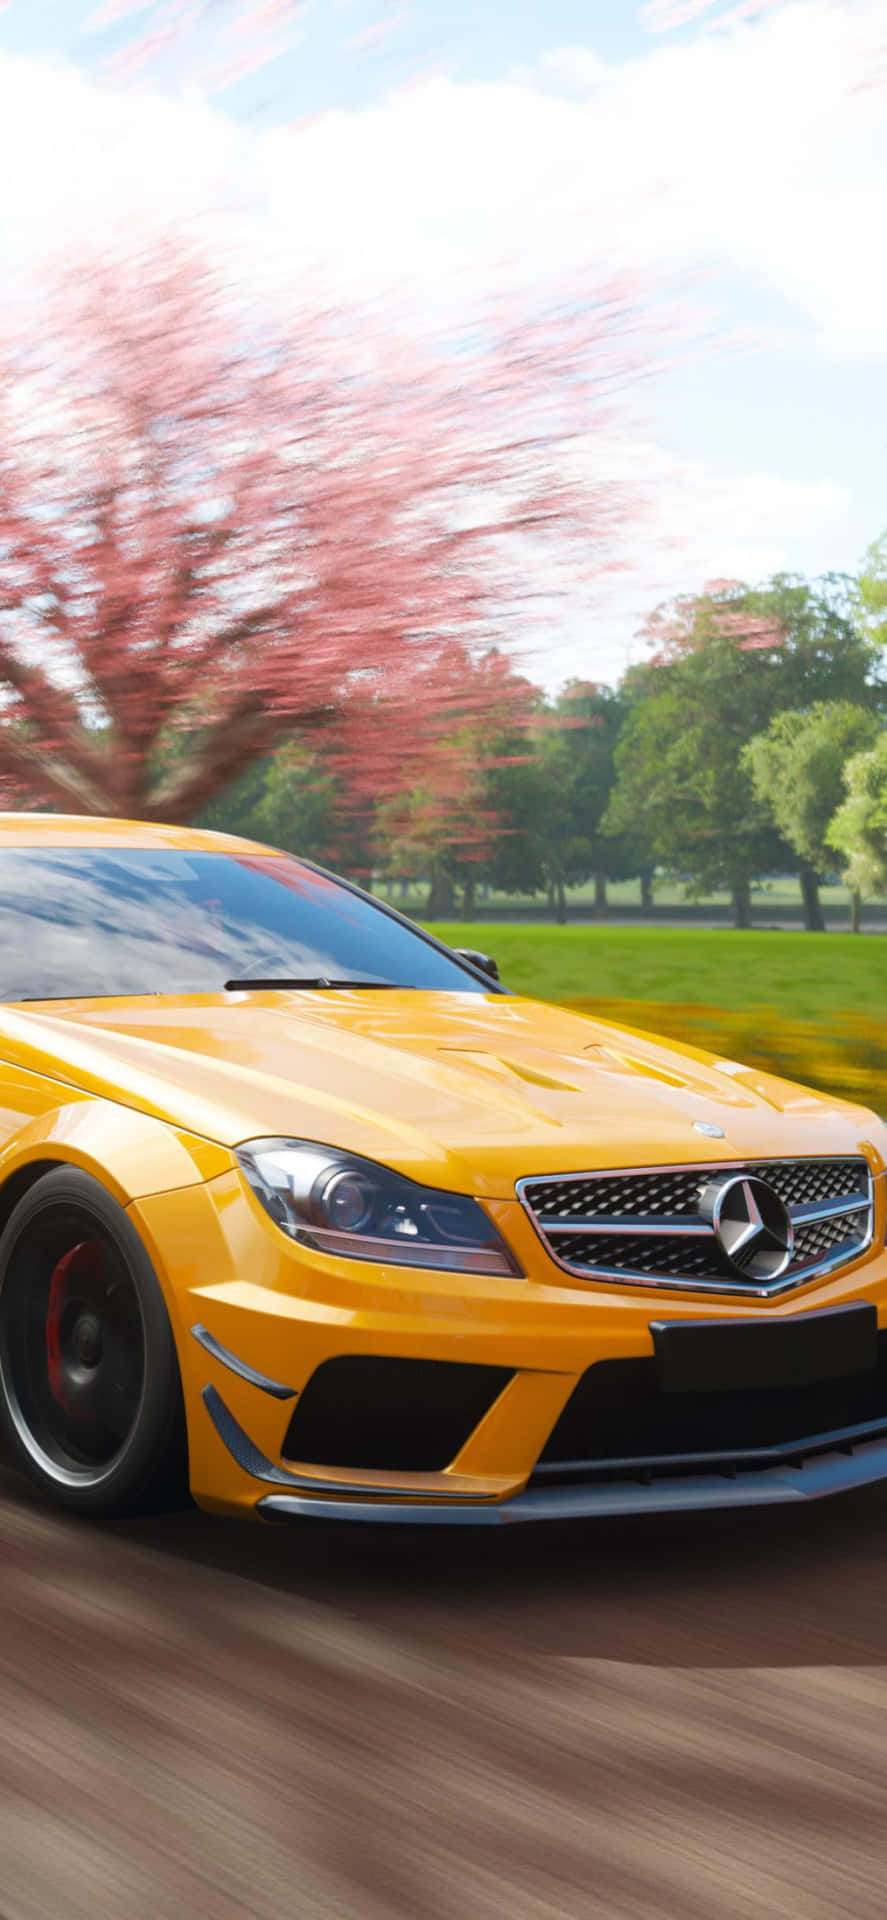 Combine luxury and technology with the Mercedes Benz phone Wallpaper